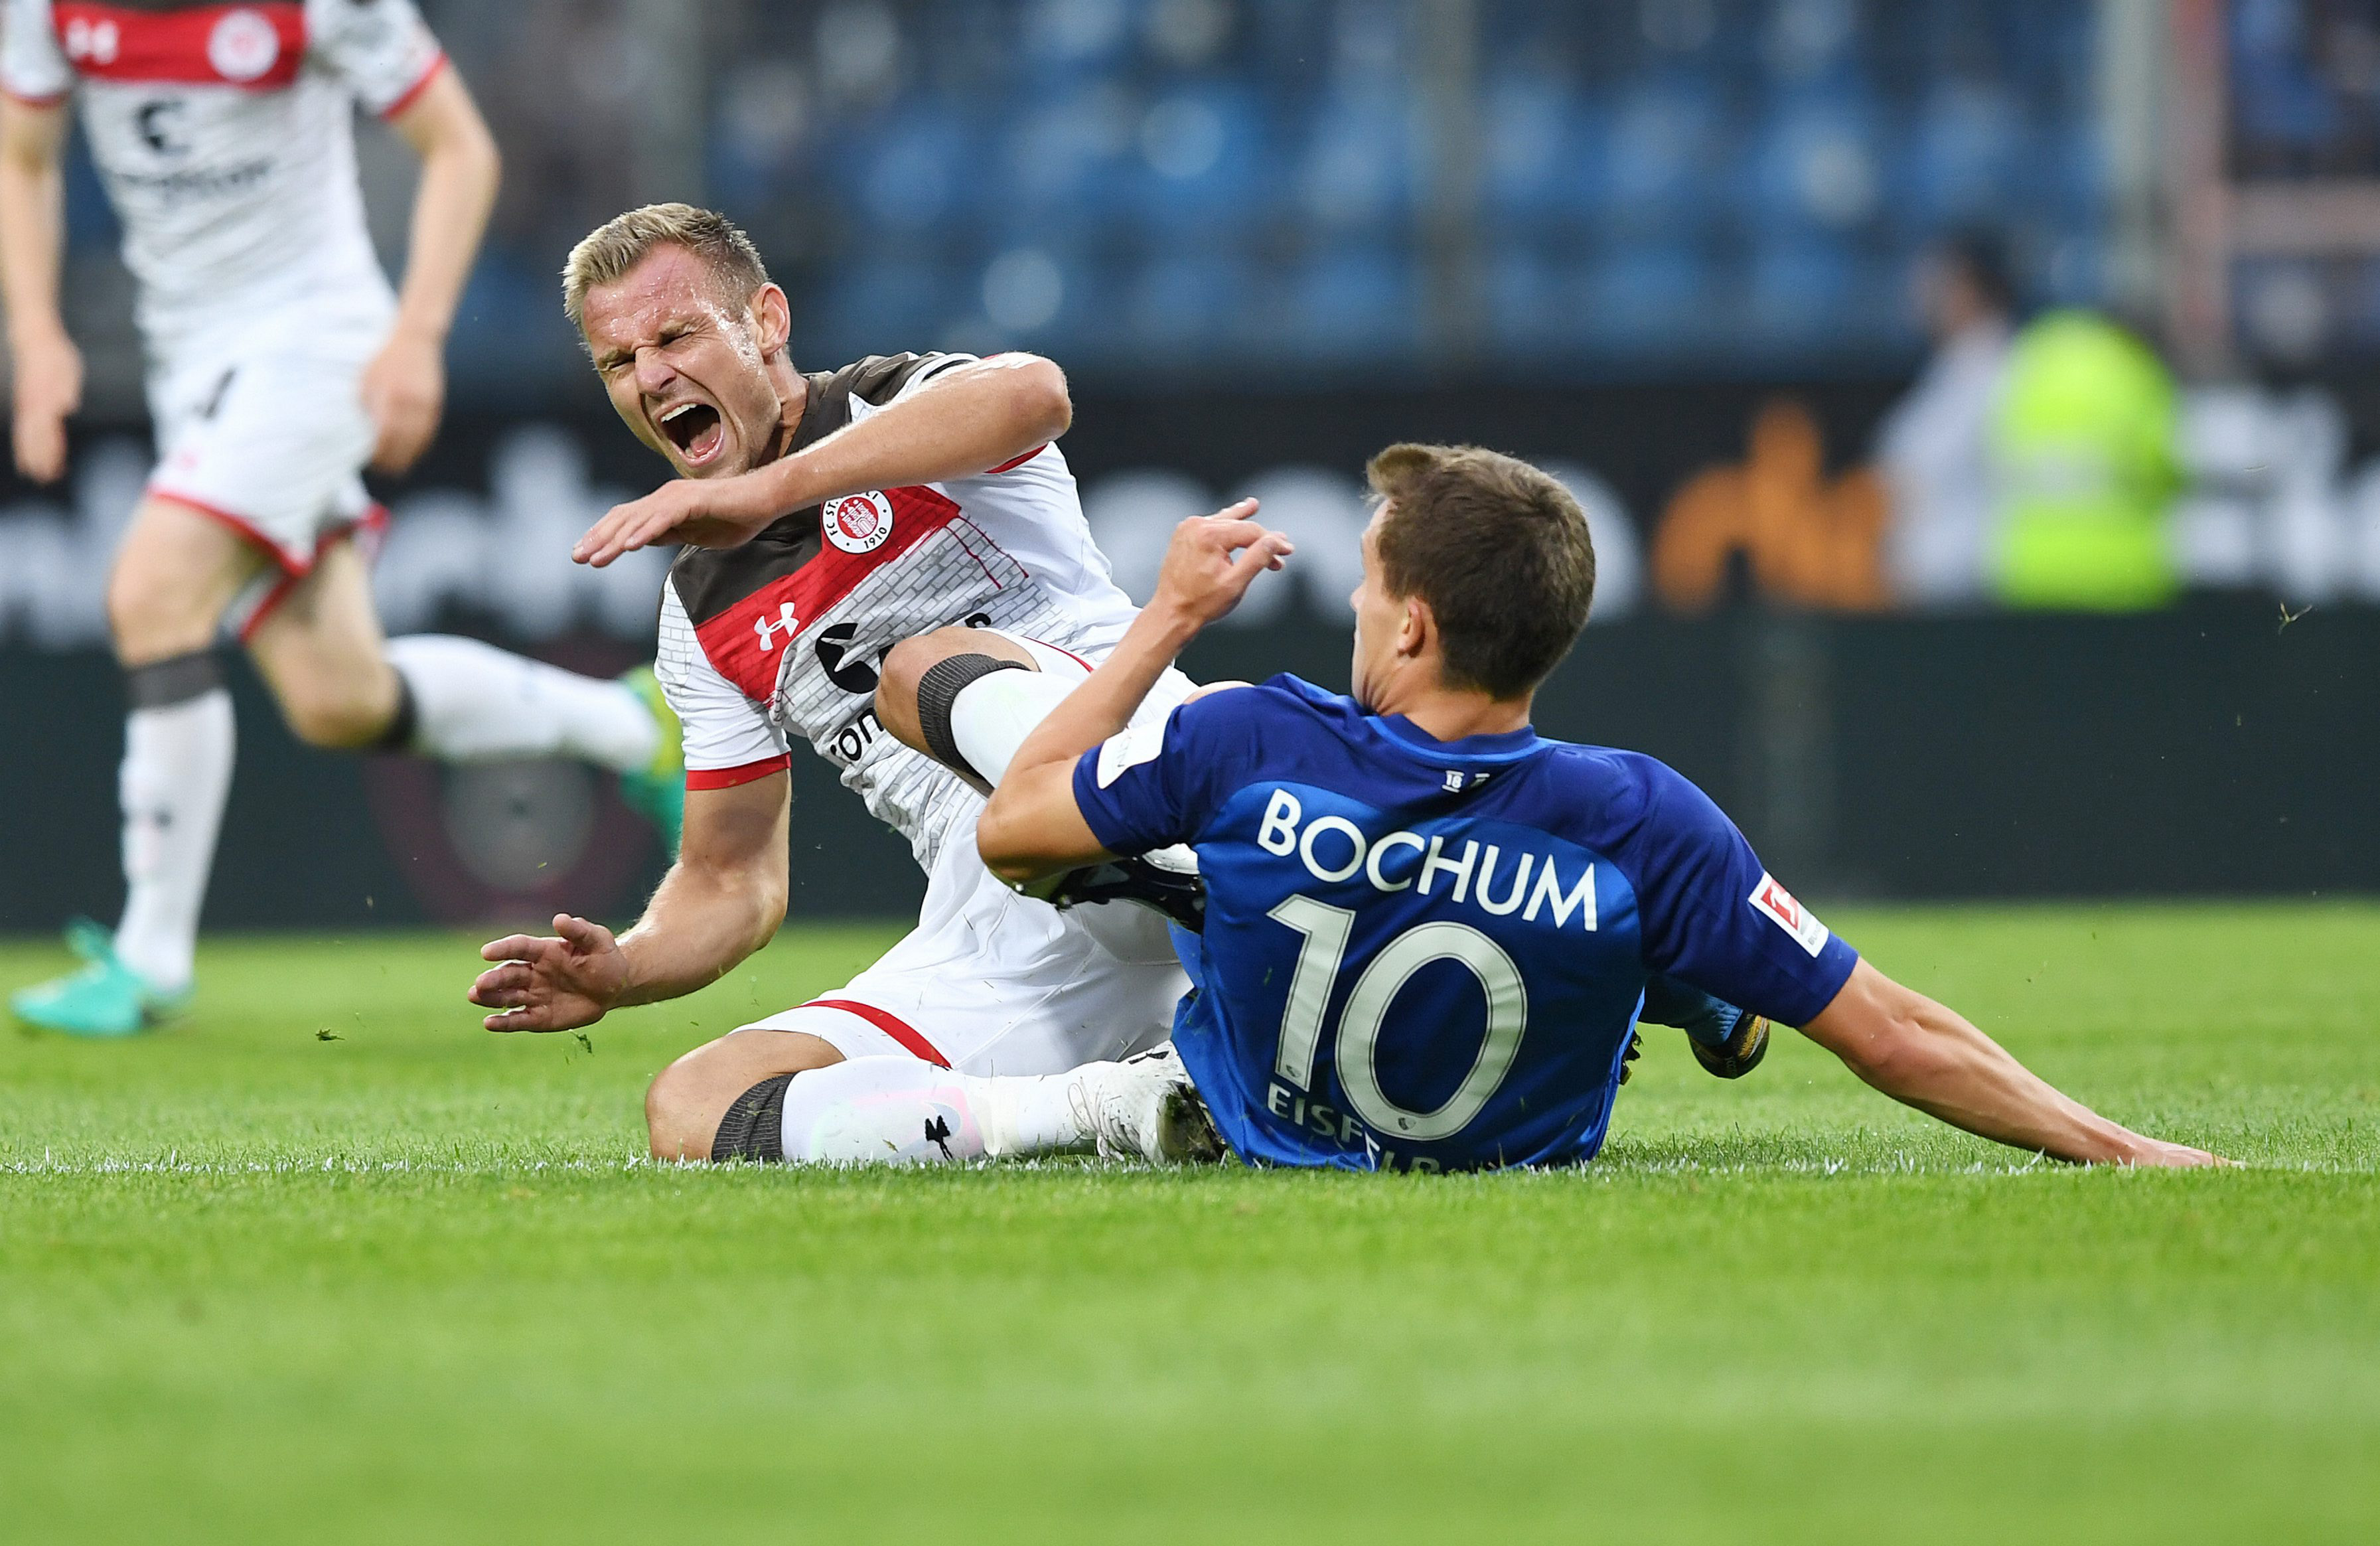 Bernd Nehrig could have opened the scoring early on. Here is fouled by Bochum's Thomas Eisfeld.